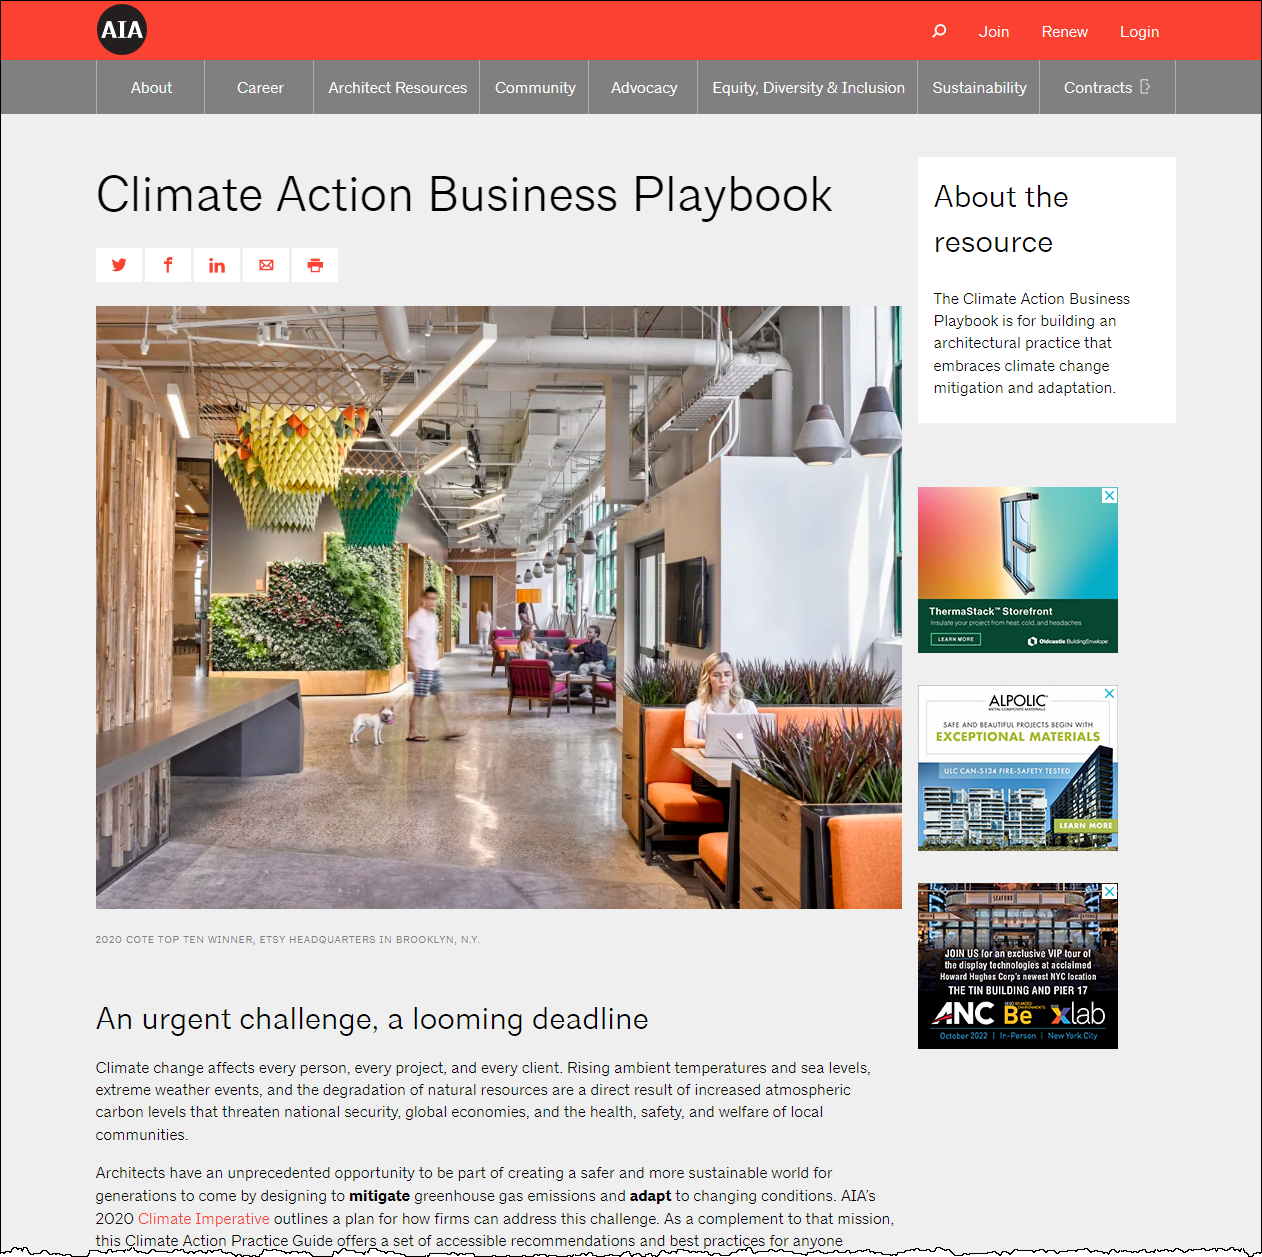 Screen capture of AIA website showing the new AIA Climate Action Business Playbook landing page